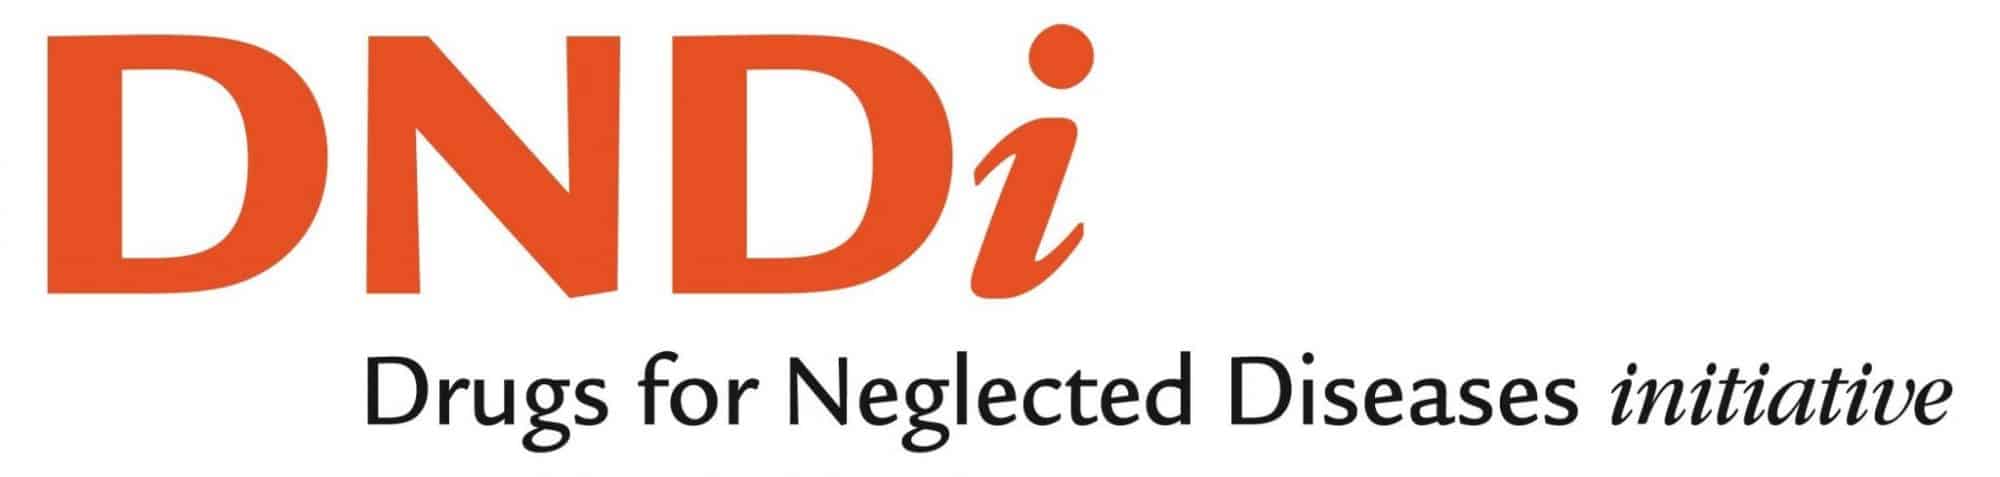 Drugs for Neglected Diseases initiative Logo